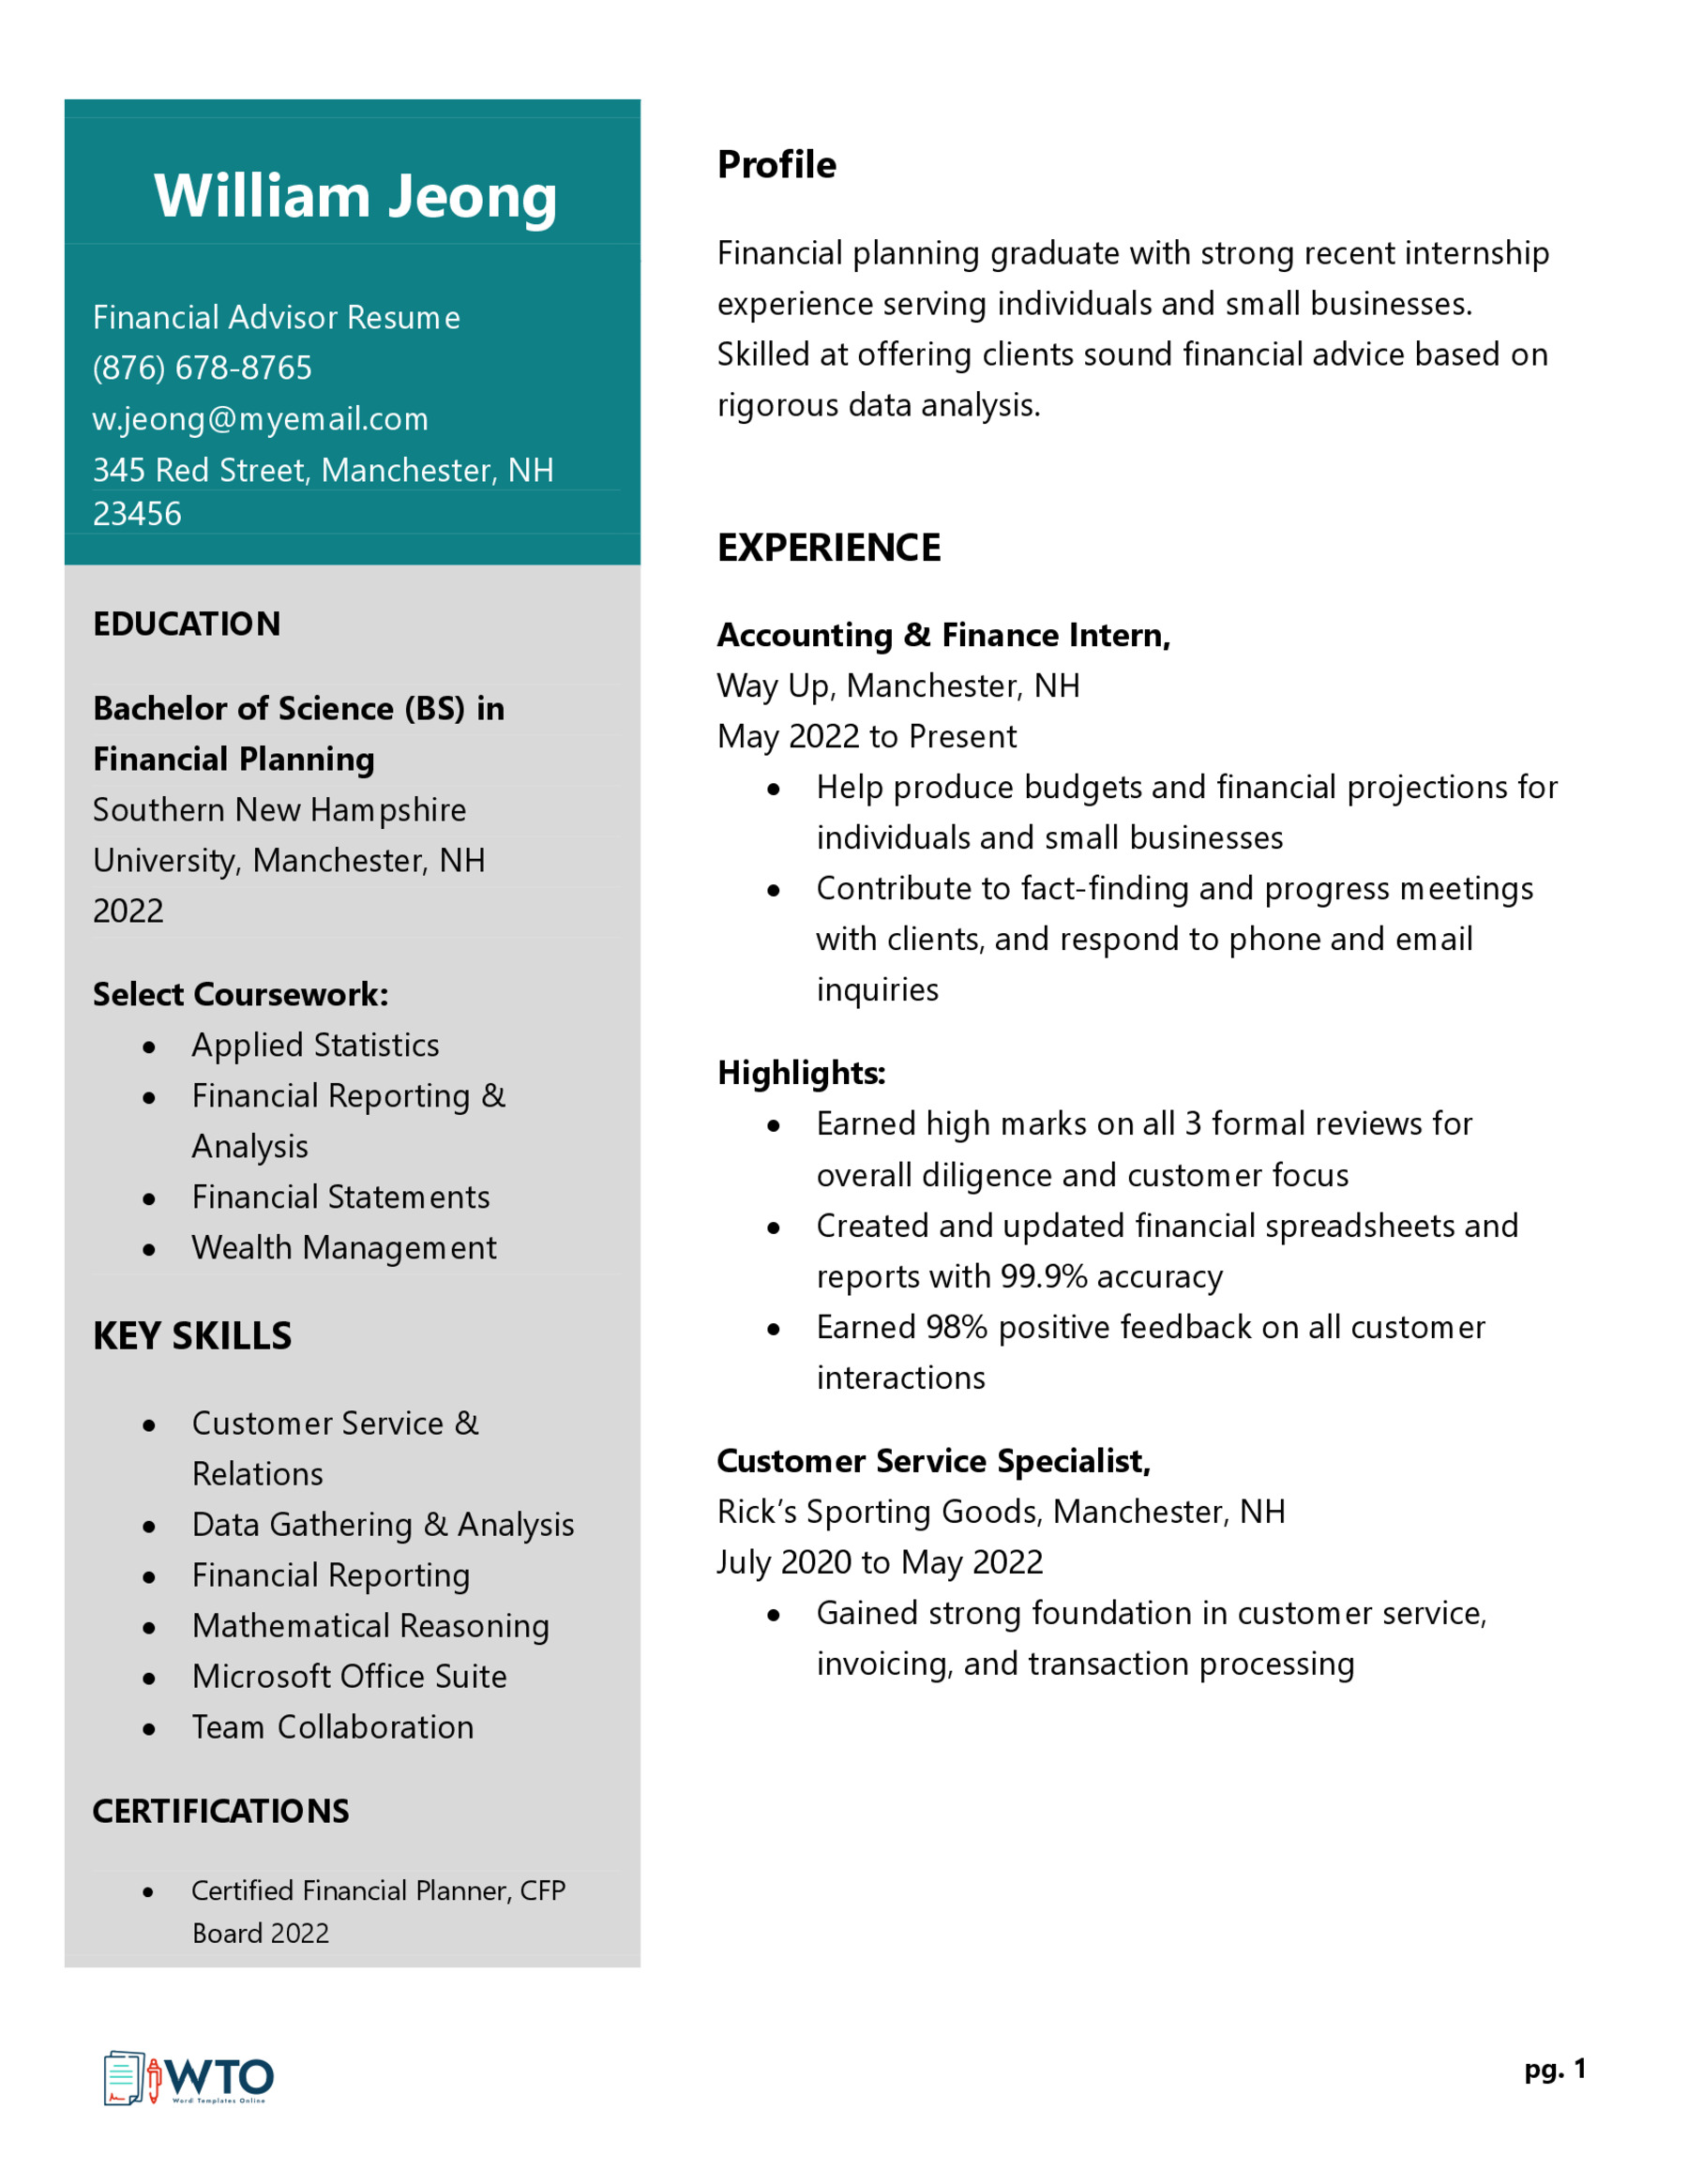 Financial Advisor Resume Template - Ready-to-Use Word Document